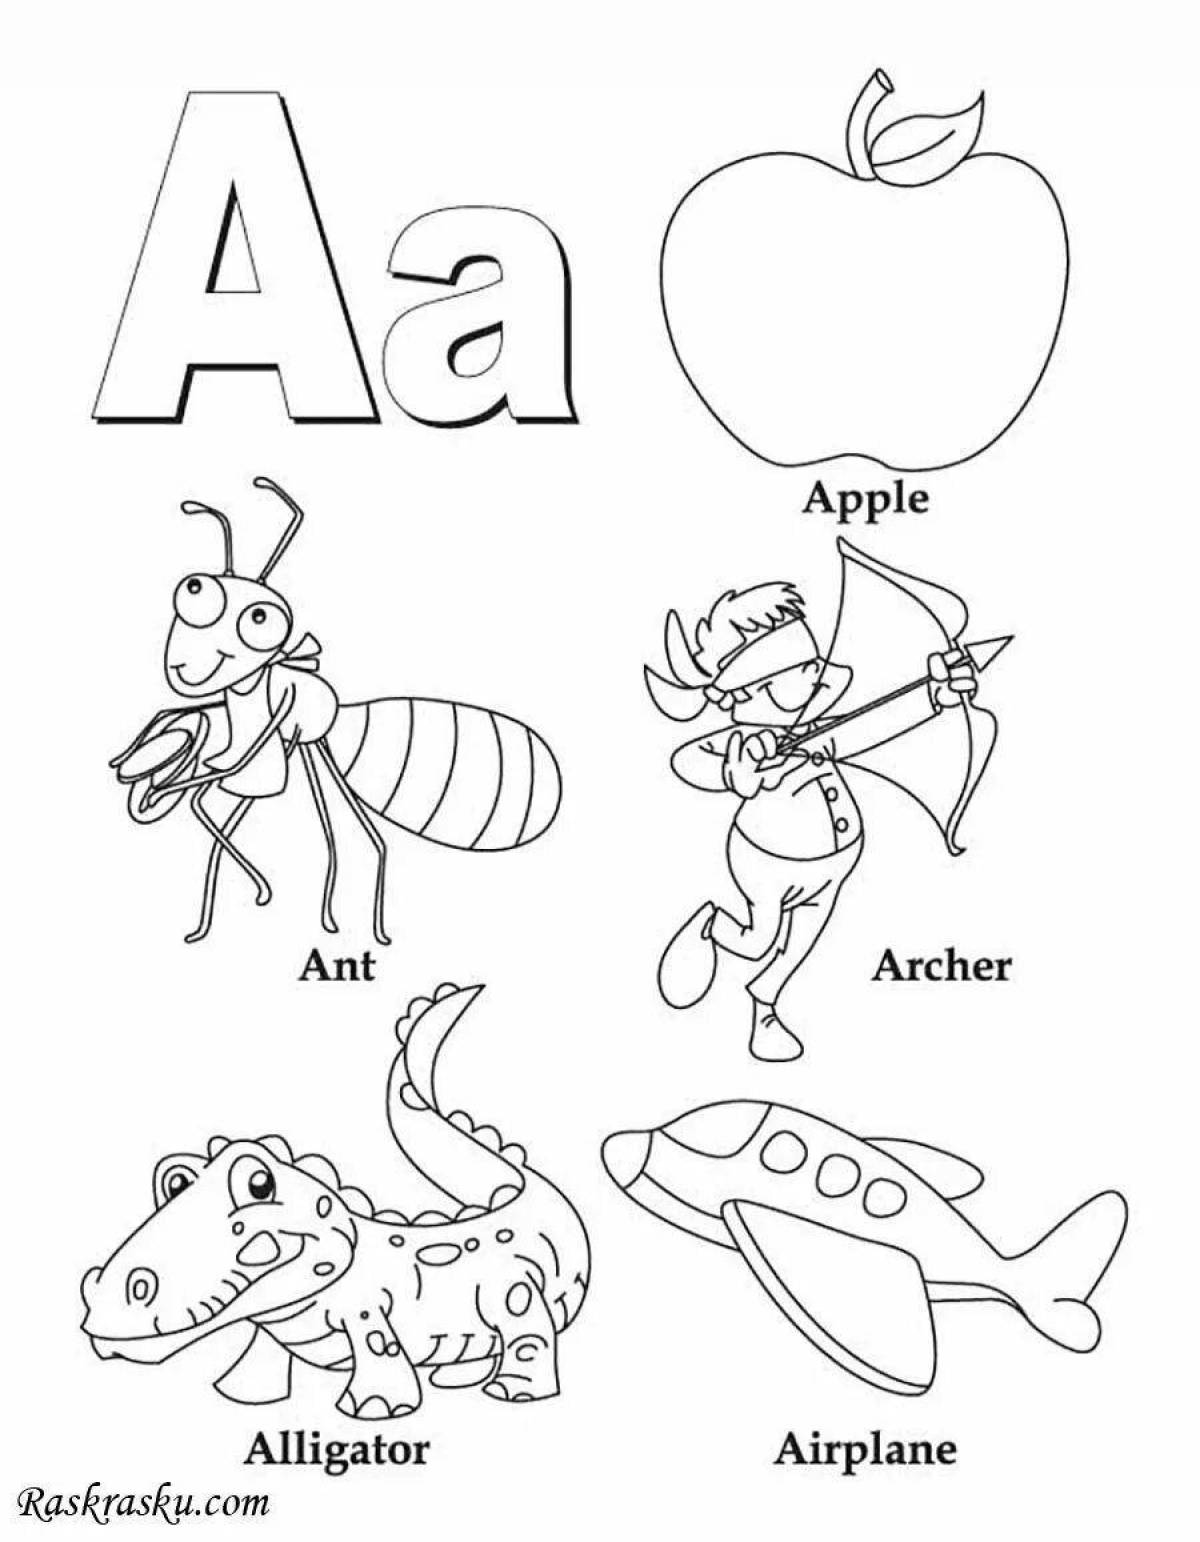 Colorful english alphabet coloring page for kids of all grades